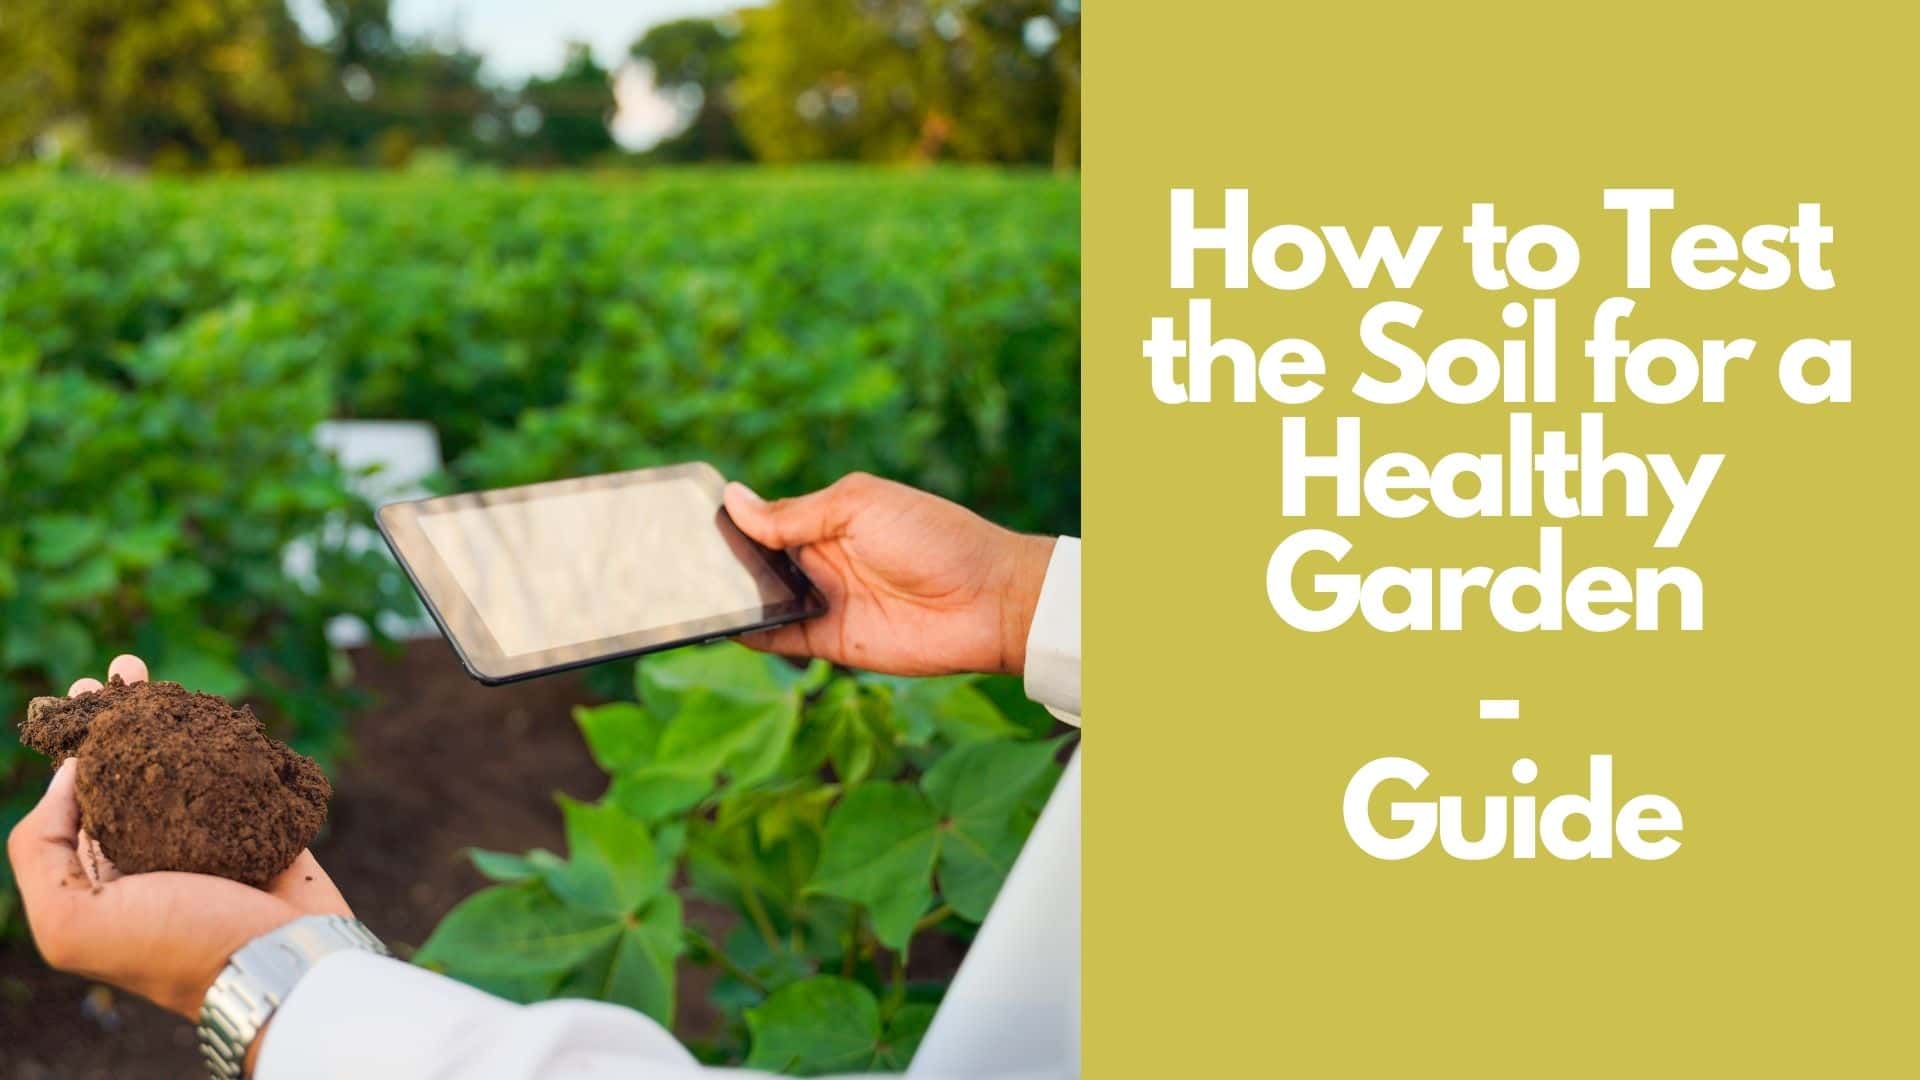 How to Test the Soil for a Healthy Garden Guide